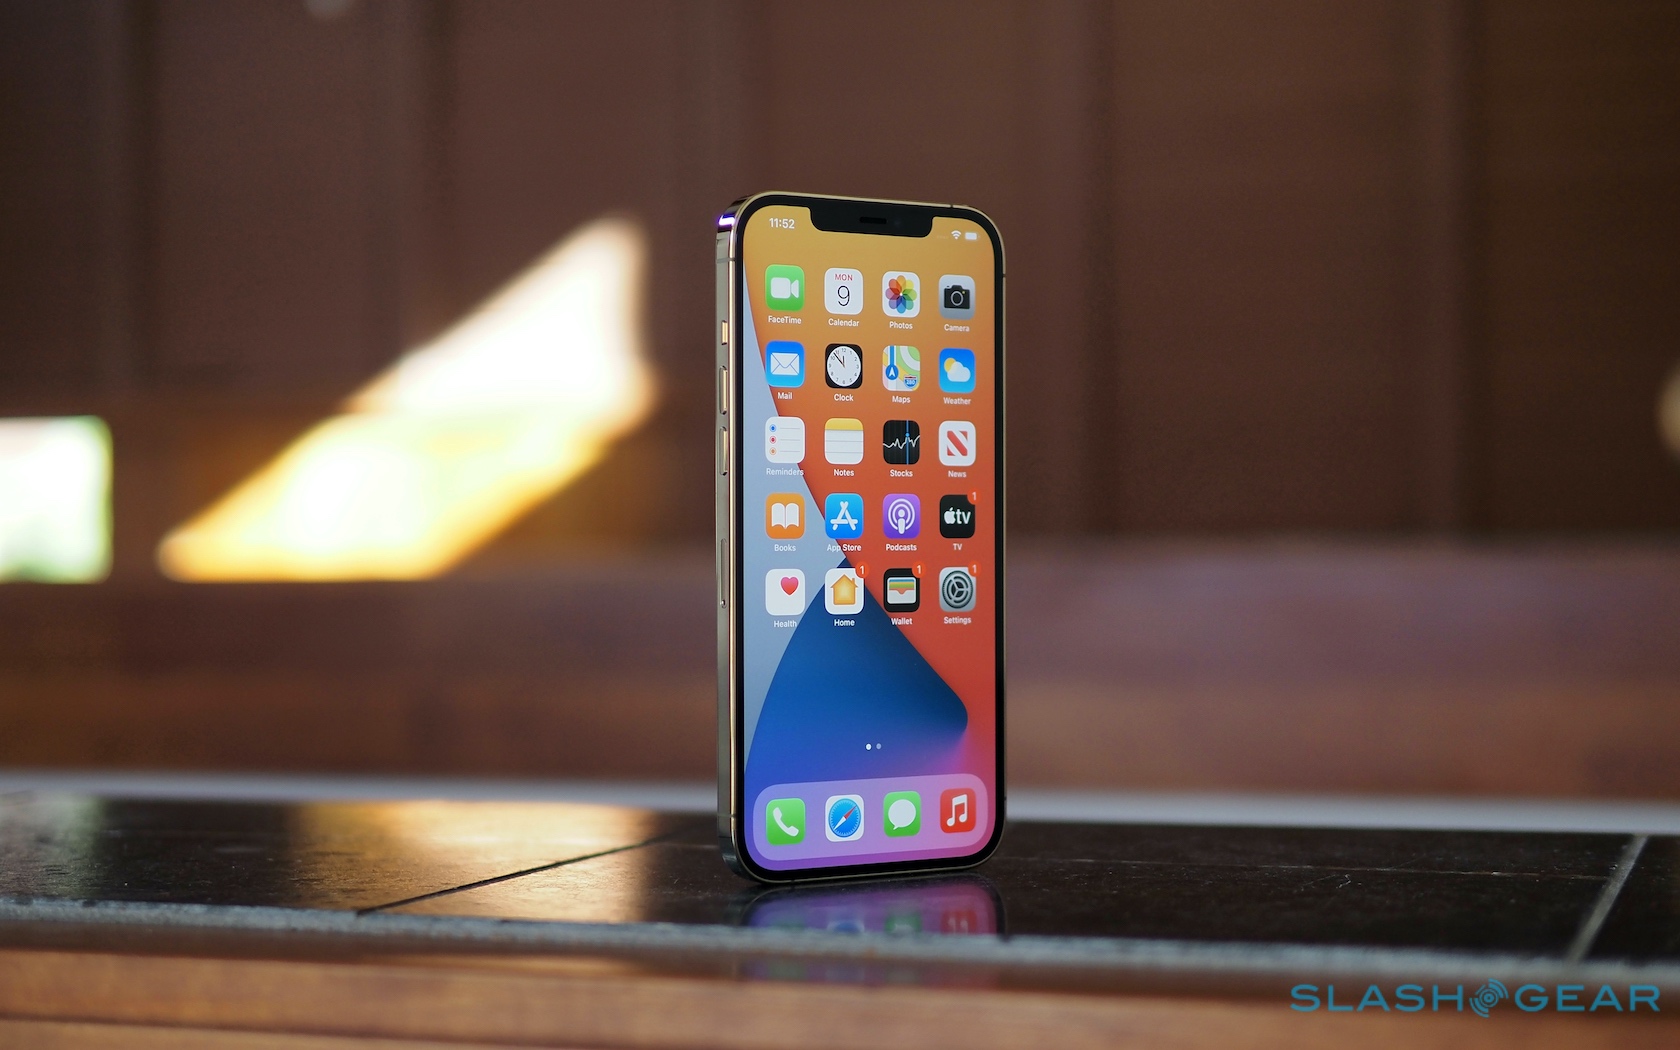 iOS 14.3 released: ProRAW for iPhone 12 Pro plus AirPods Max support